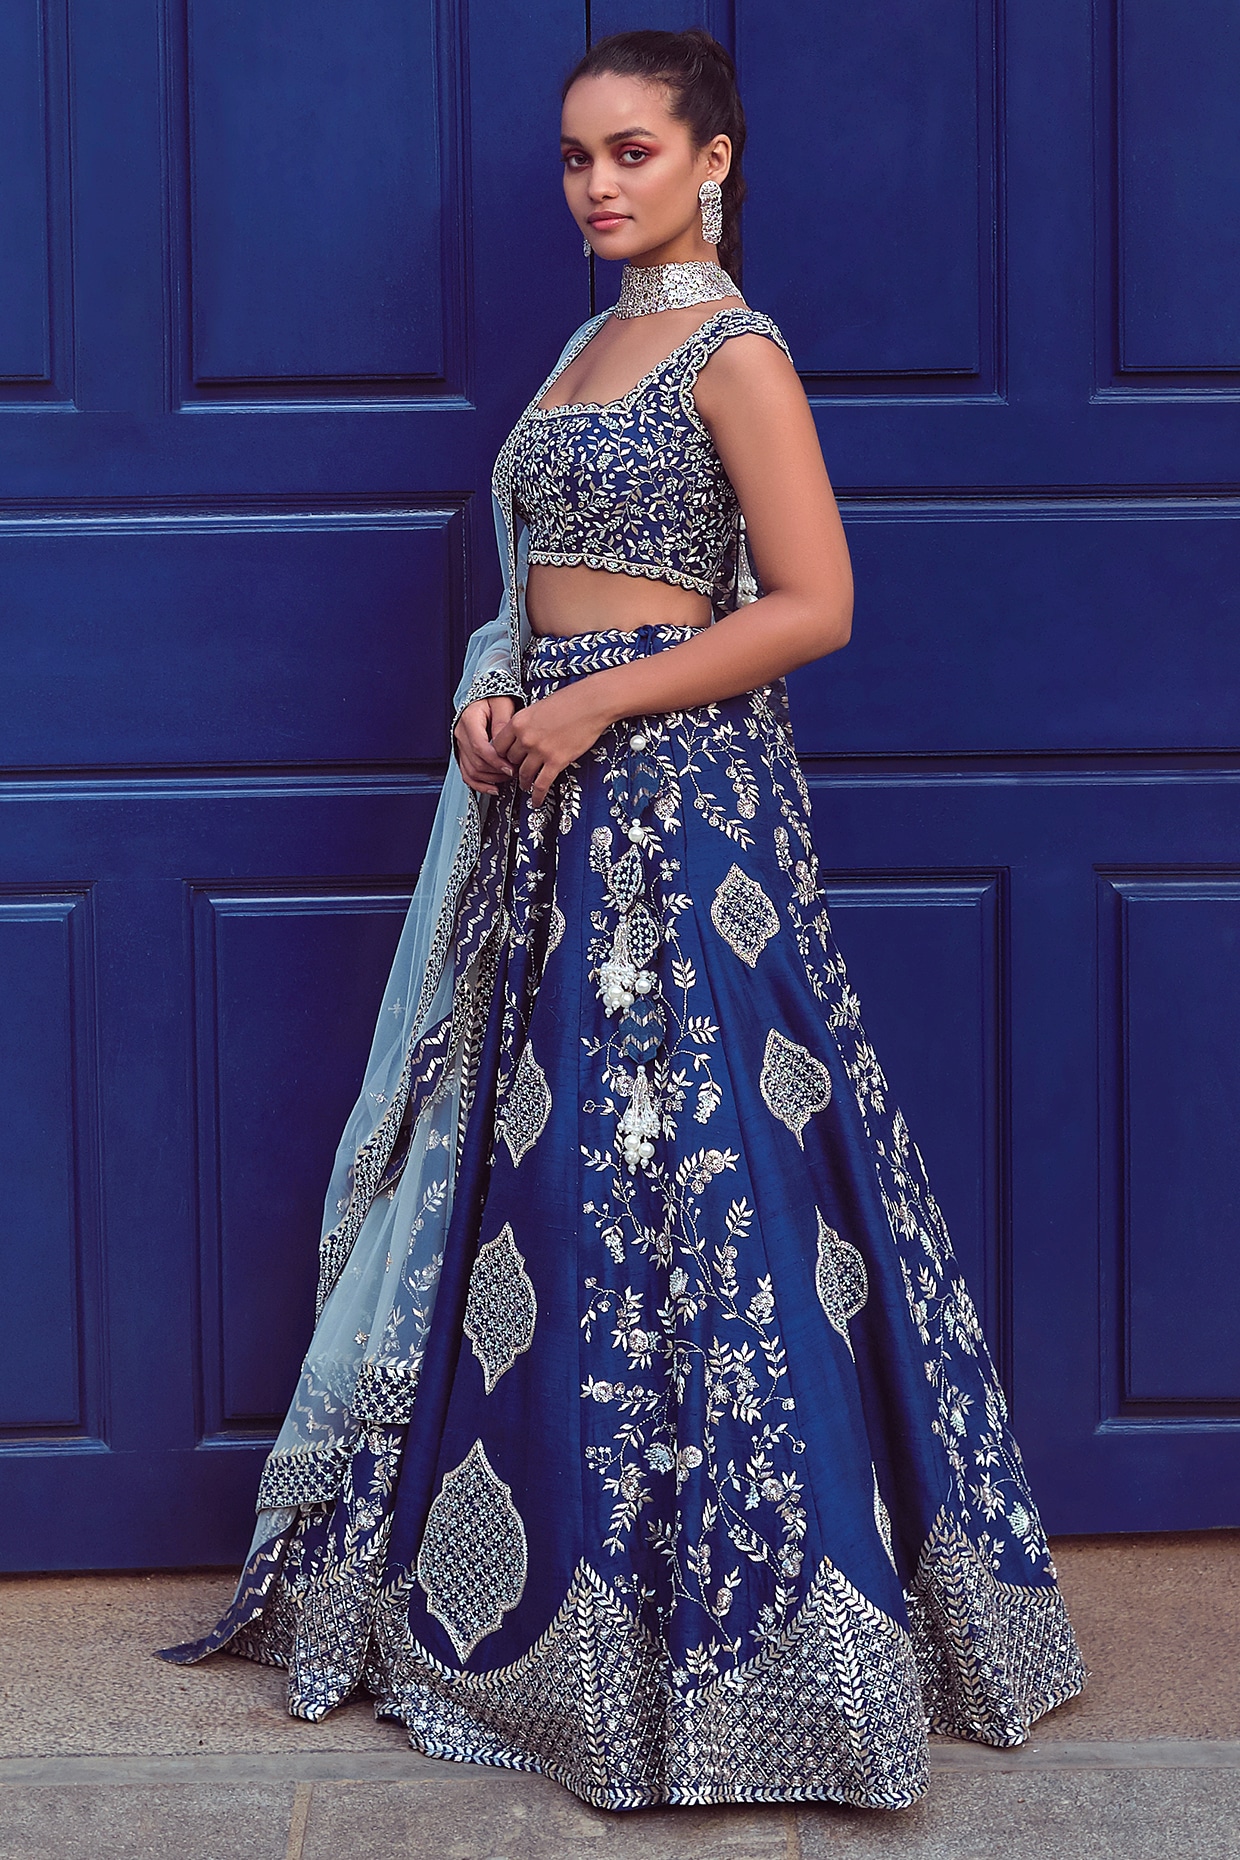 Bride in Shimmering Blue and Silver Lehenga Choli | Indian wedding outfits,  Indian wedding inspiration, Indian wedding photography